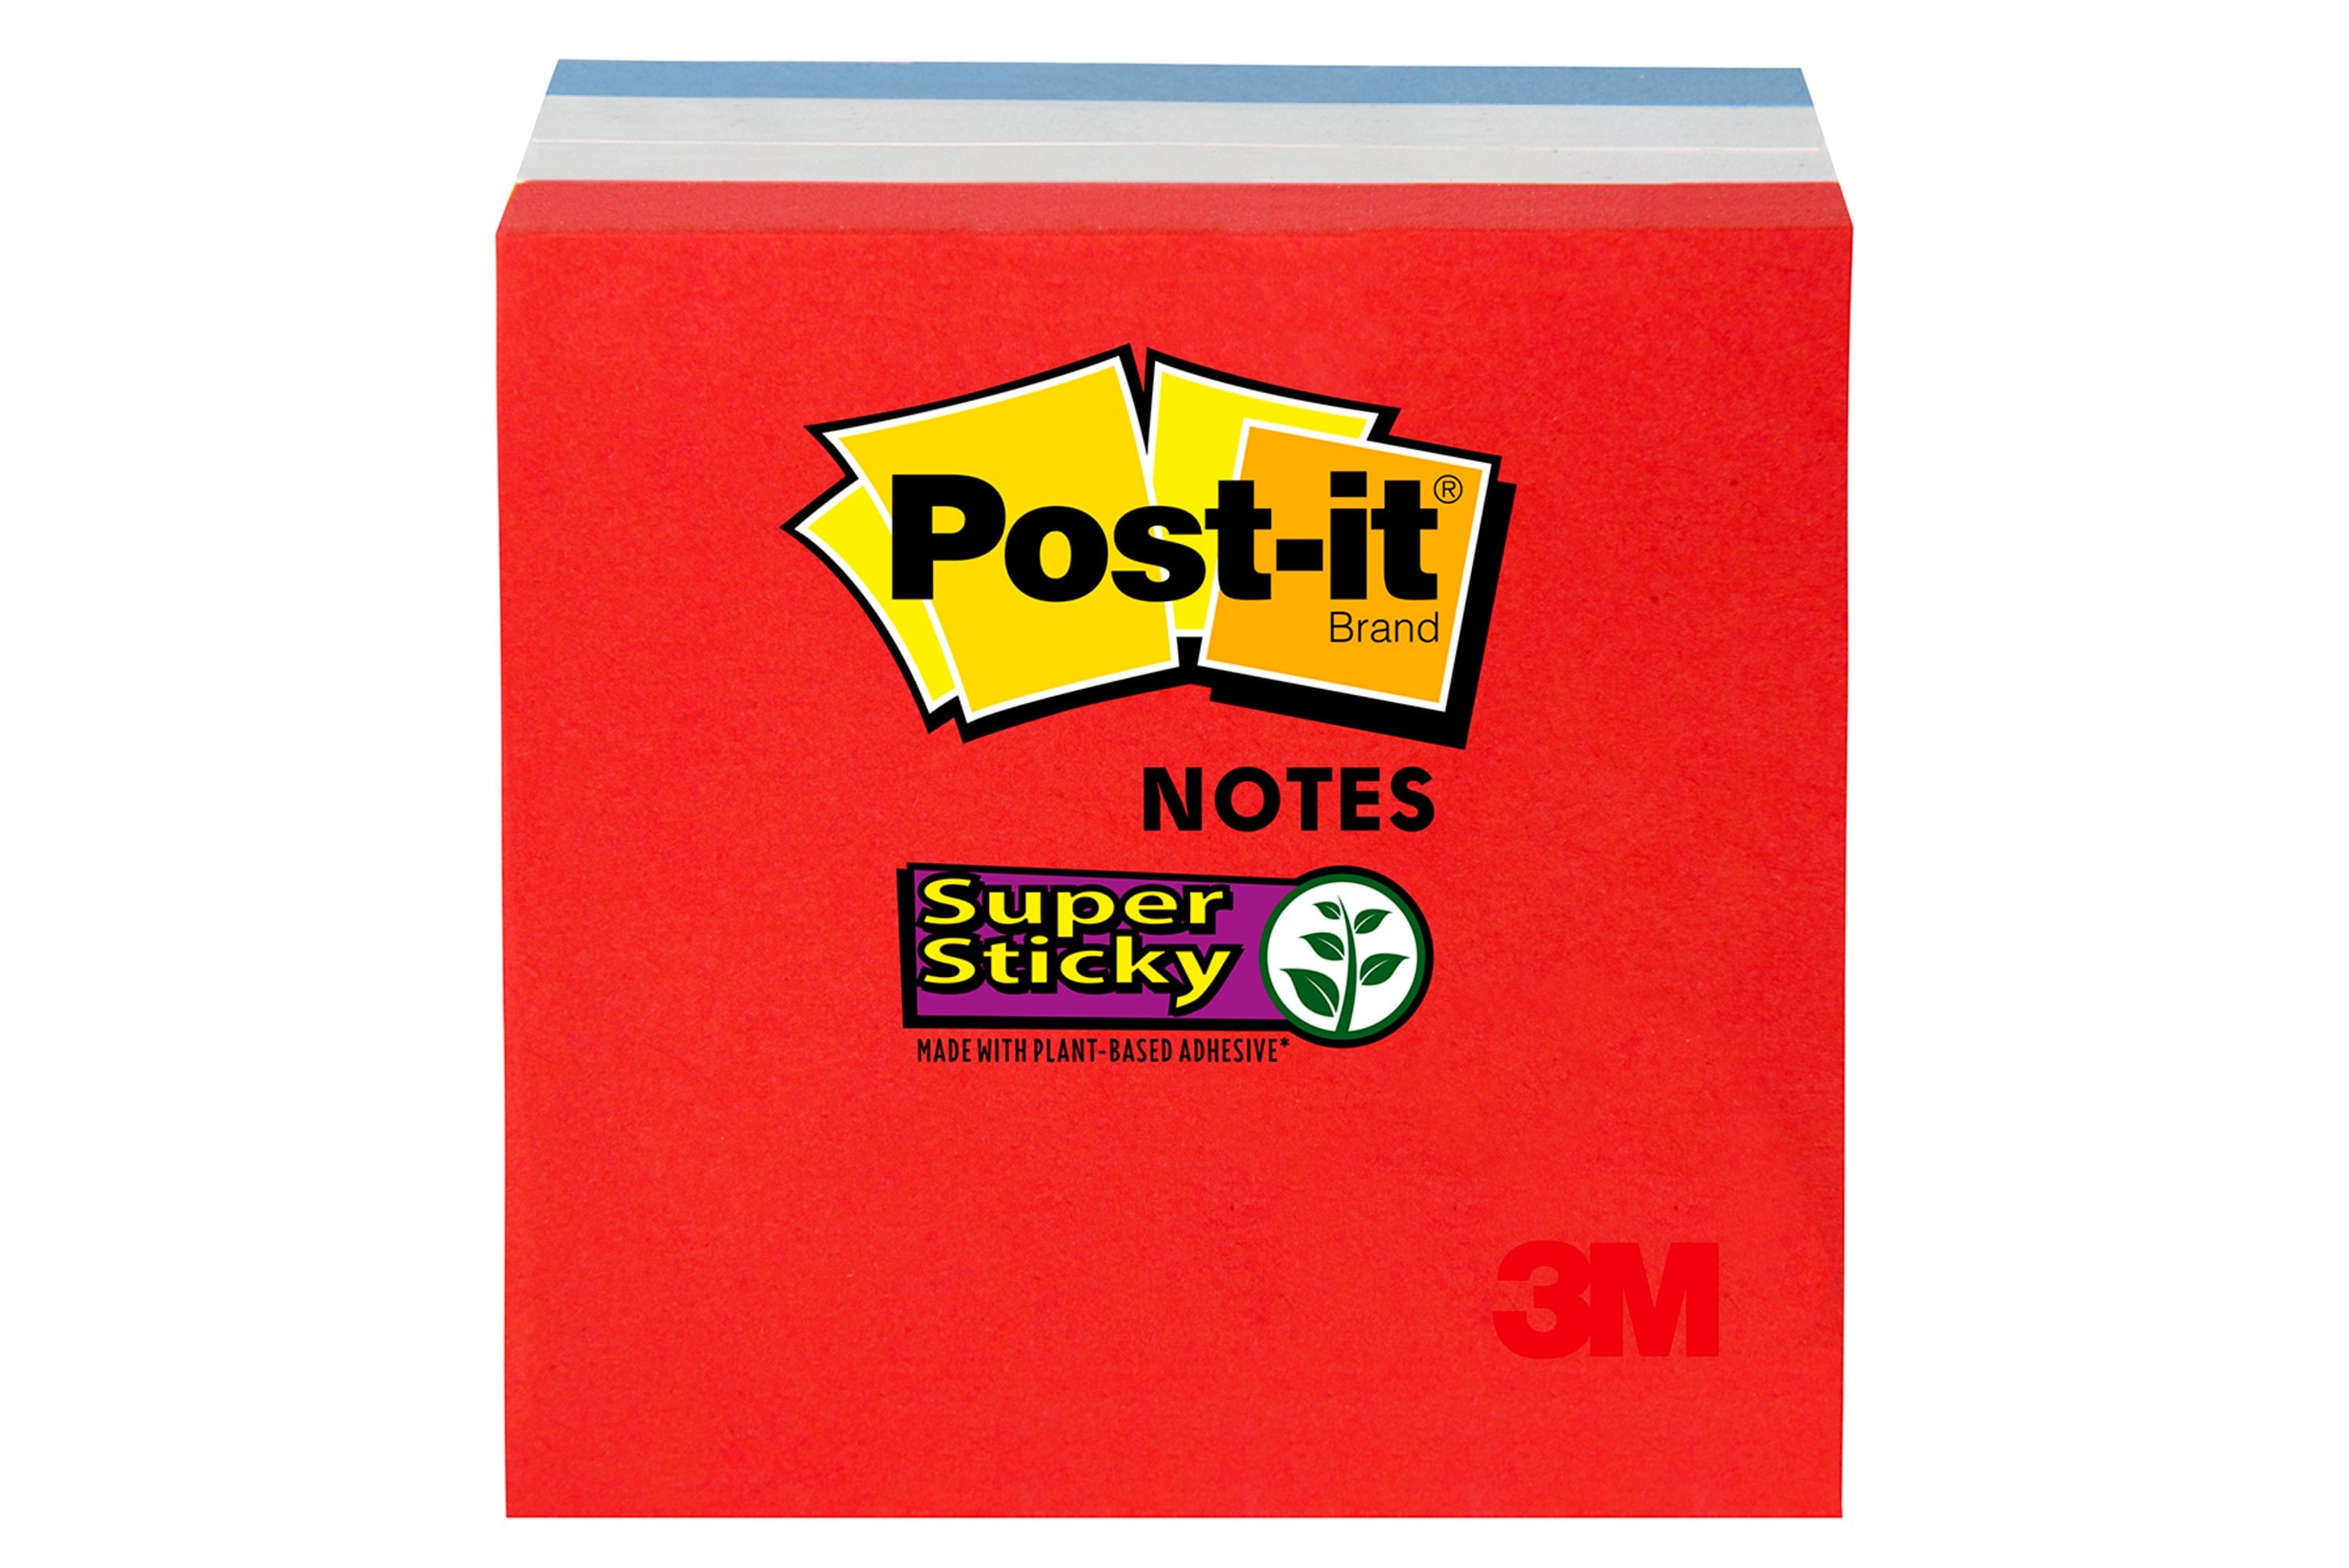 Post-it Super Sticky Notes 4 PK Multicolor 3"x3" Red White & Blue 720ct for sale online 